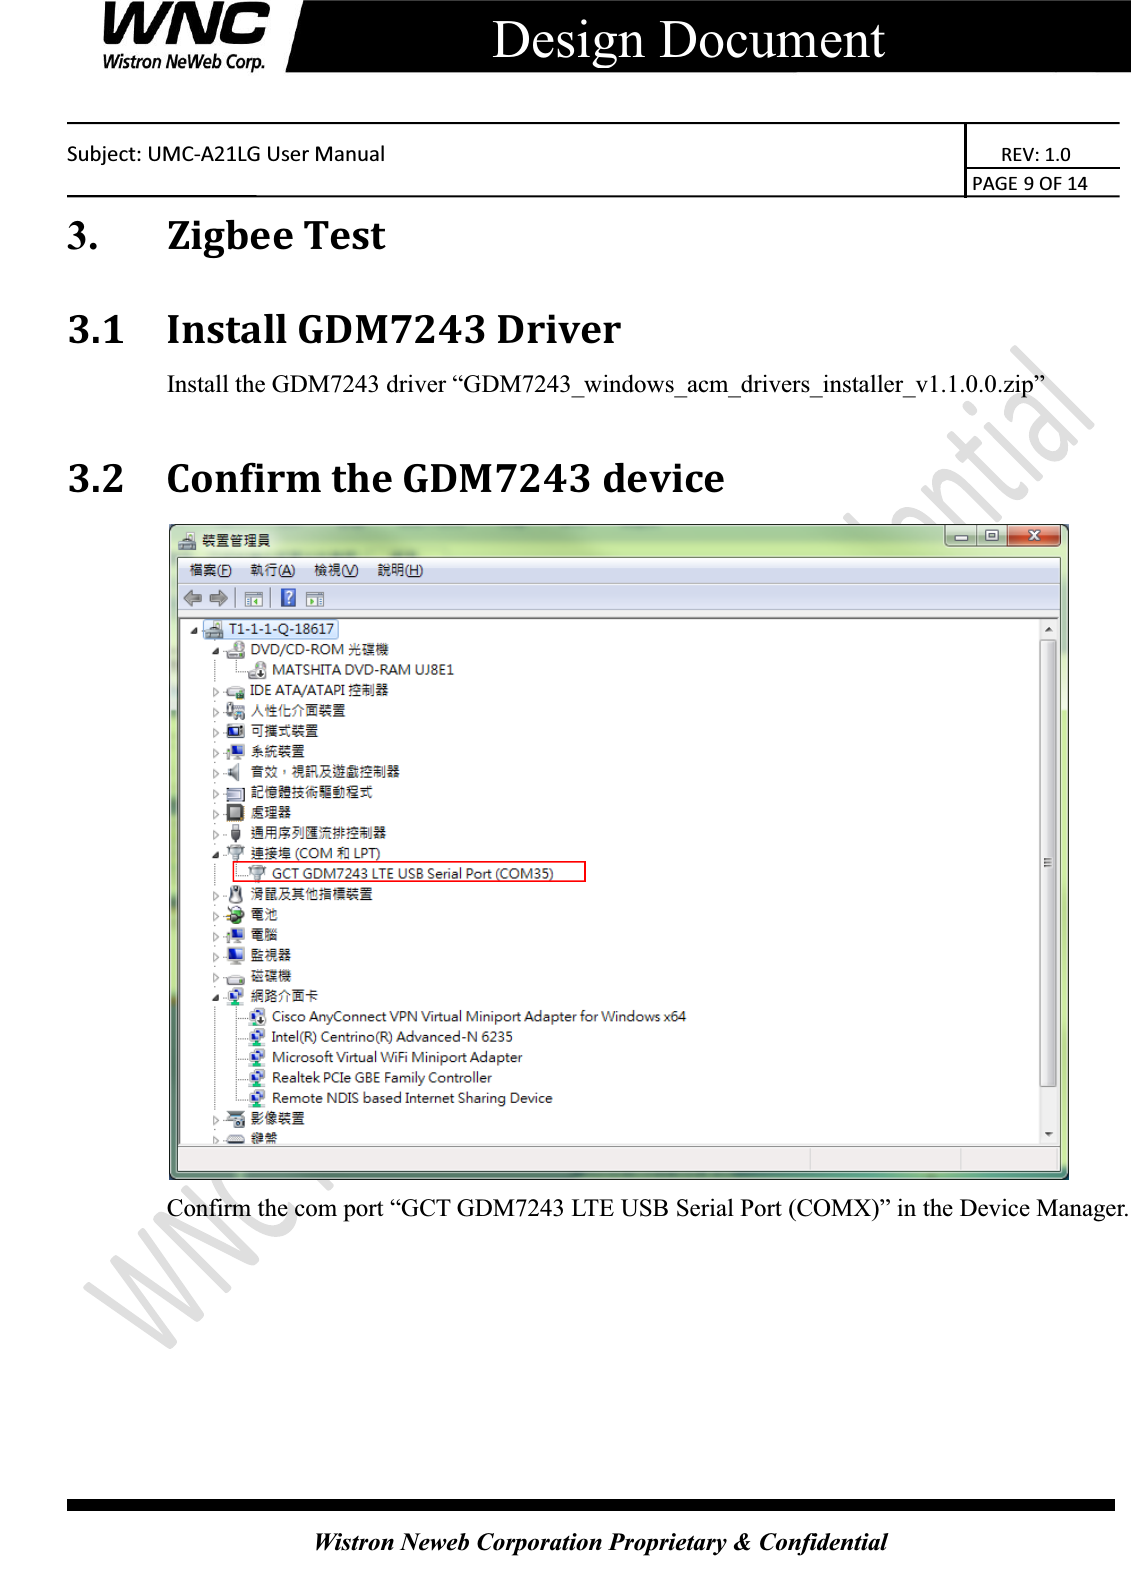    Subject: UMC-A21LG User Manual                                                          REV: 1.0                                                                                        PAGE 9 OF 14  Wistron Neweb Corporation Proprietary &amp; Confidential     Design Document 3.    Zigbee Test 3.1 Install GDM7243 Driver Install the GDM7243 driver ³GDM7243_windows_acm_drivers_installer_v1.1.0.0.zip´  3.2 Confirm the GDM7243 device  Confirm the com port ³GCT GDM7243 LTE USB Serial Port (COMX)´ in the Device Manager.   